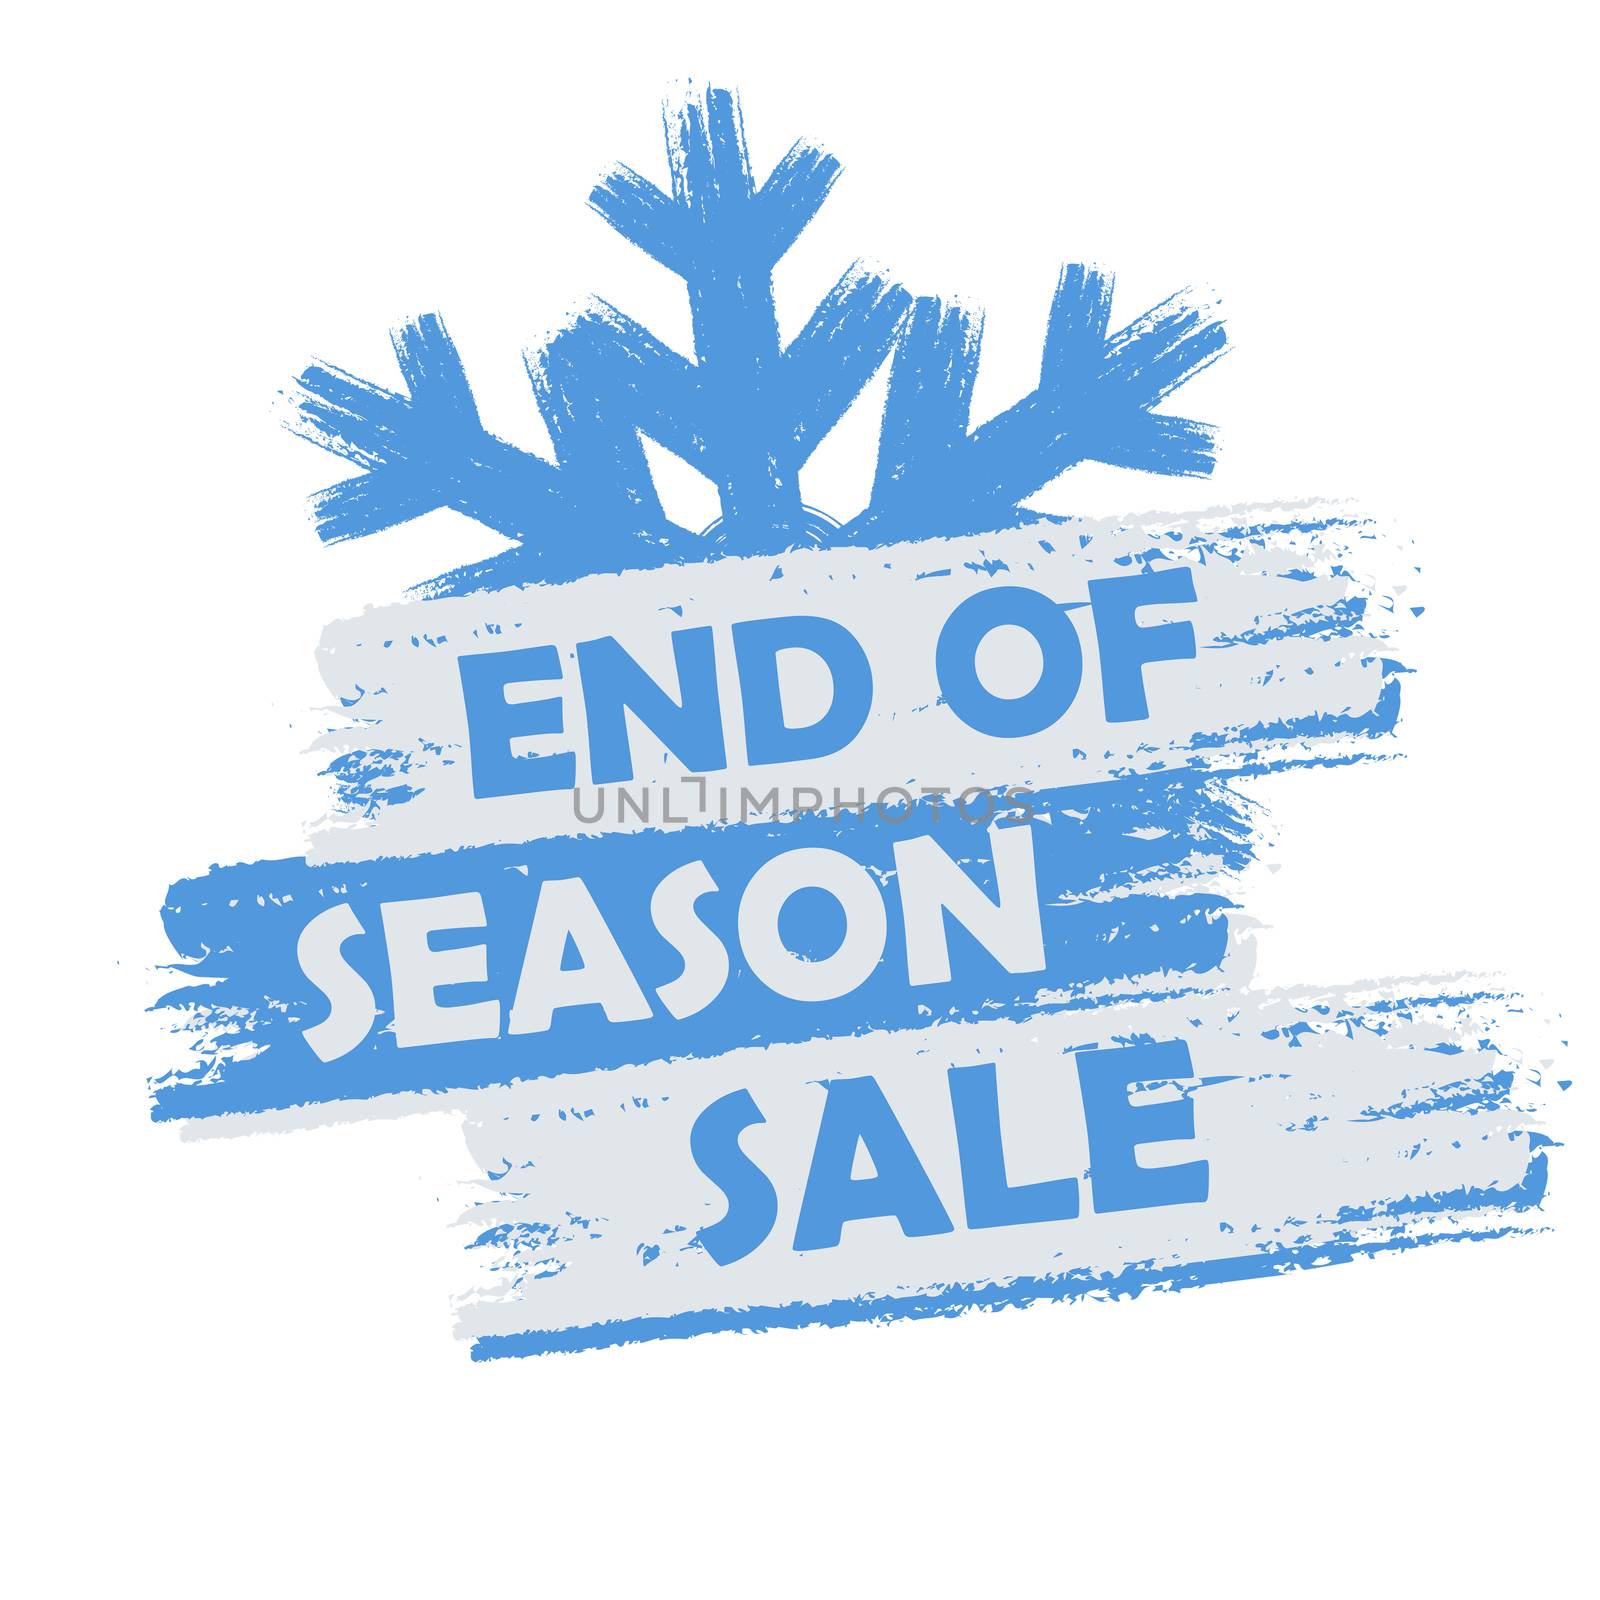 end of season sale banner - text in blue and white drawn label with snowflake symbol, business seasonal shopping concept